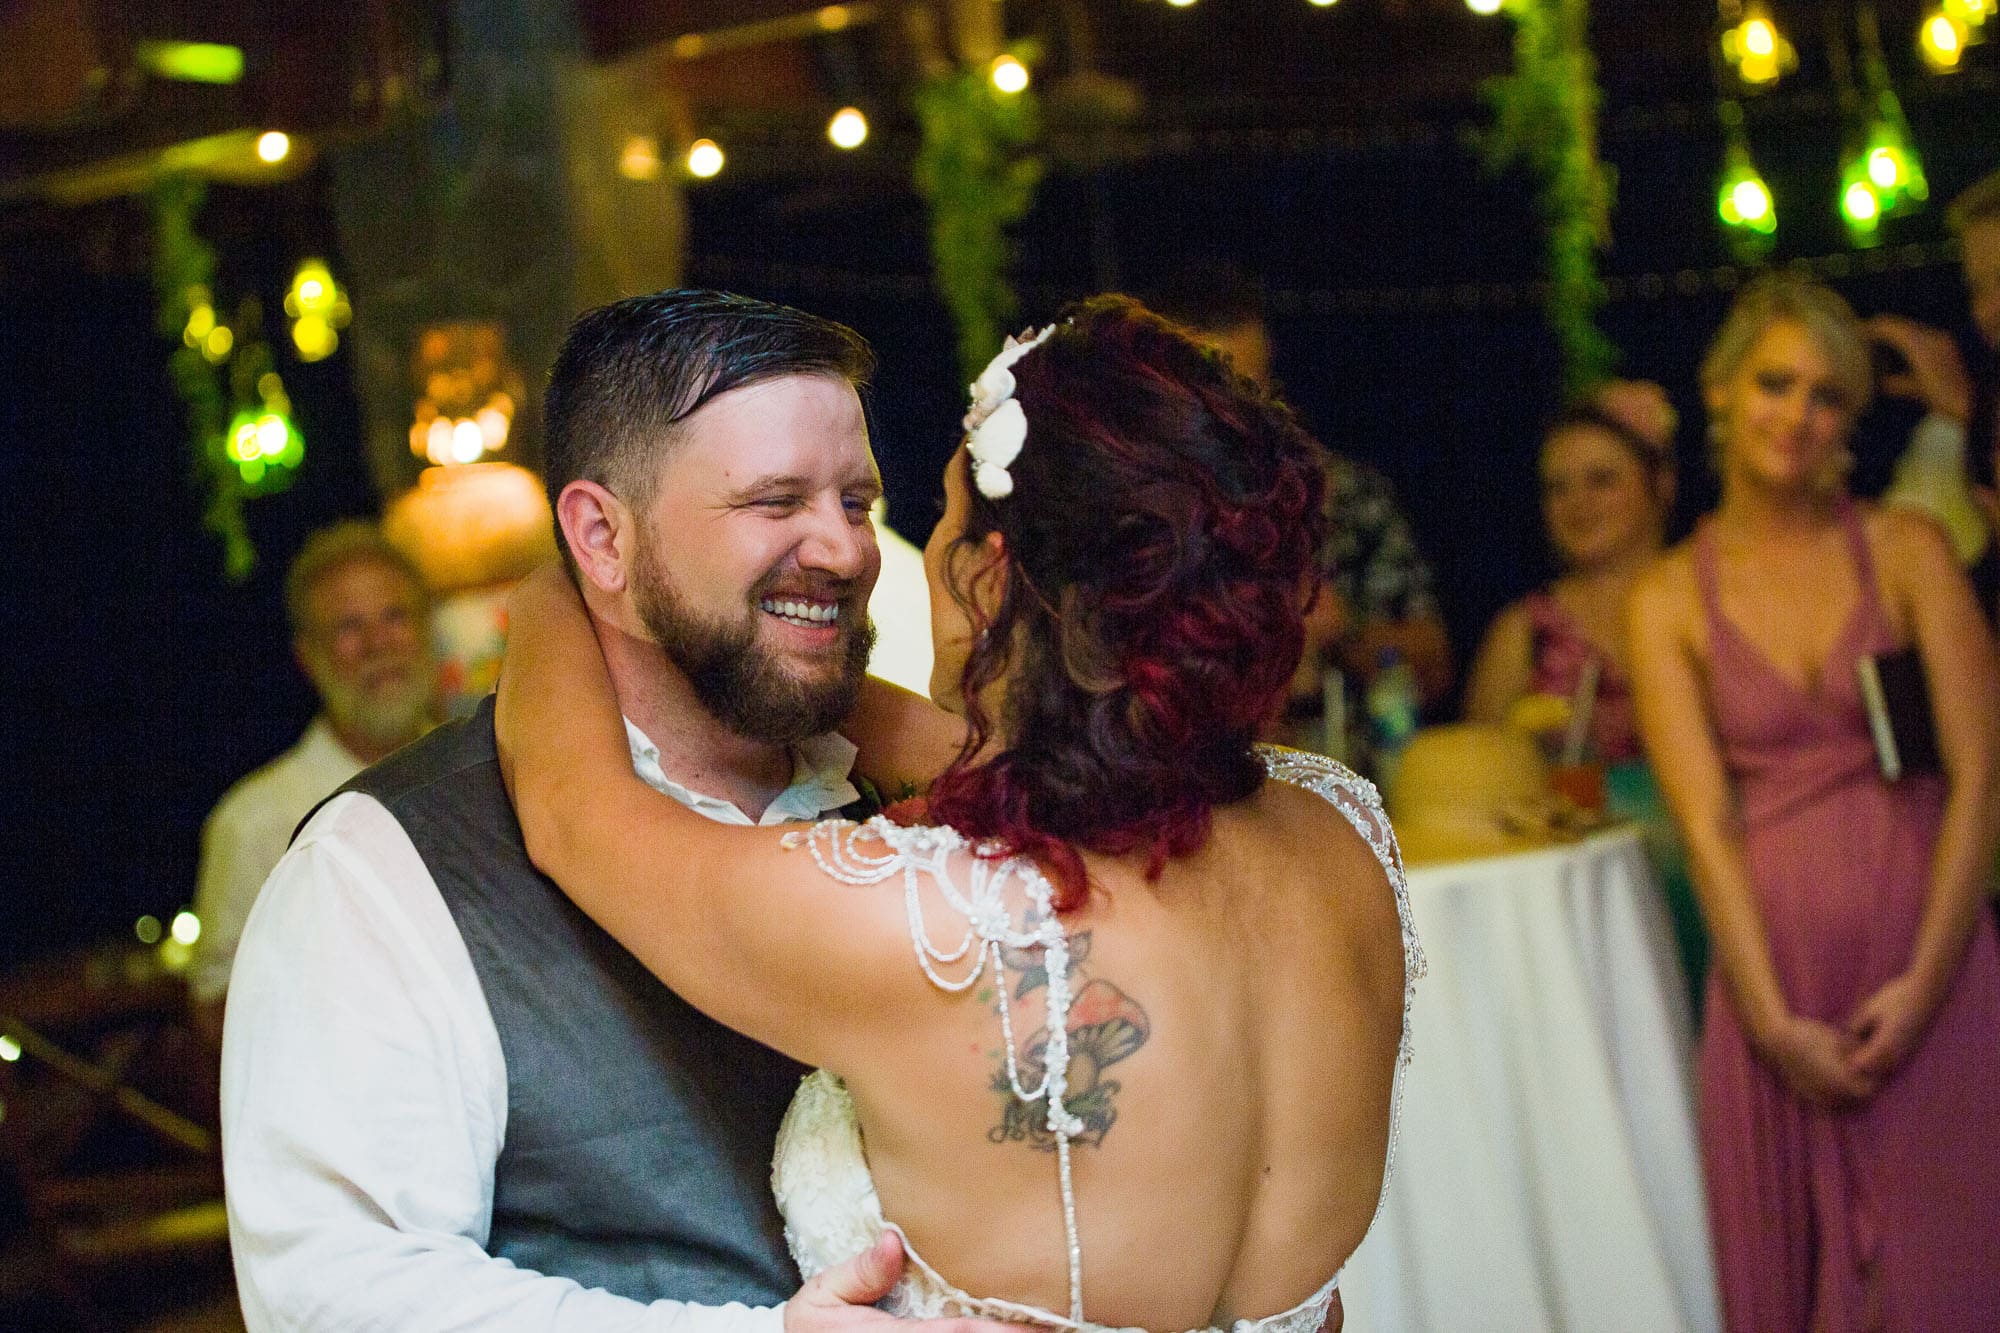 Love blooms as the bride and groom dance together